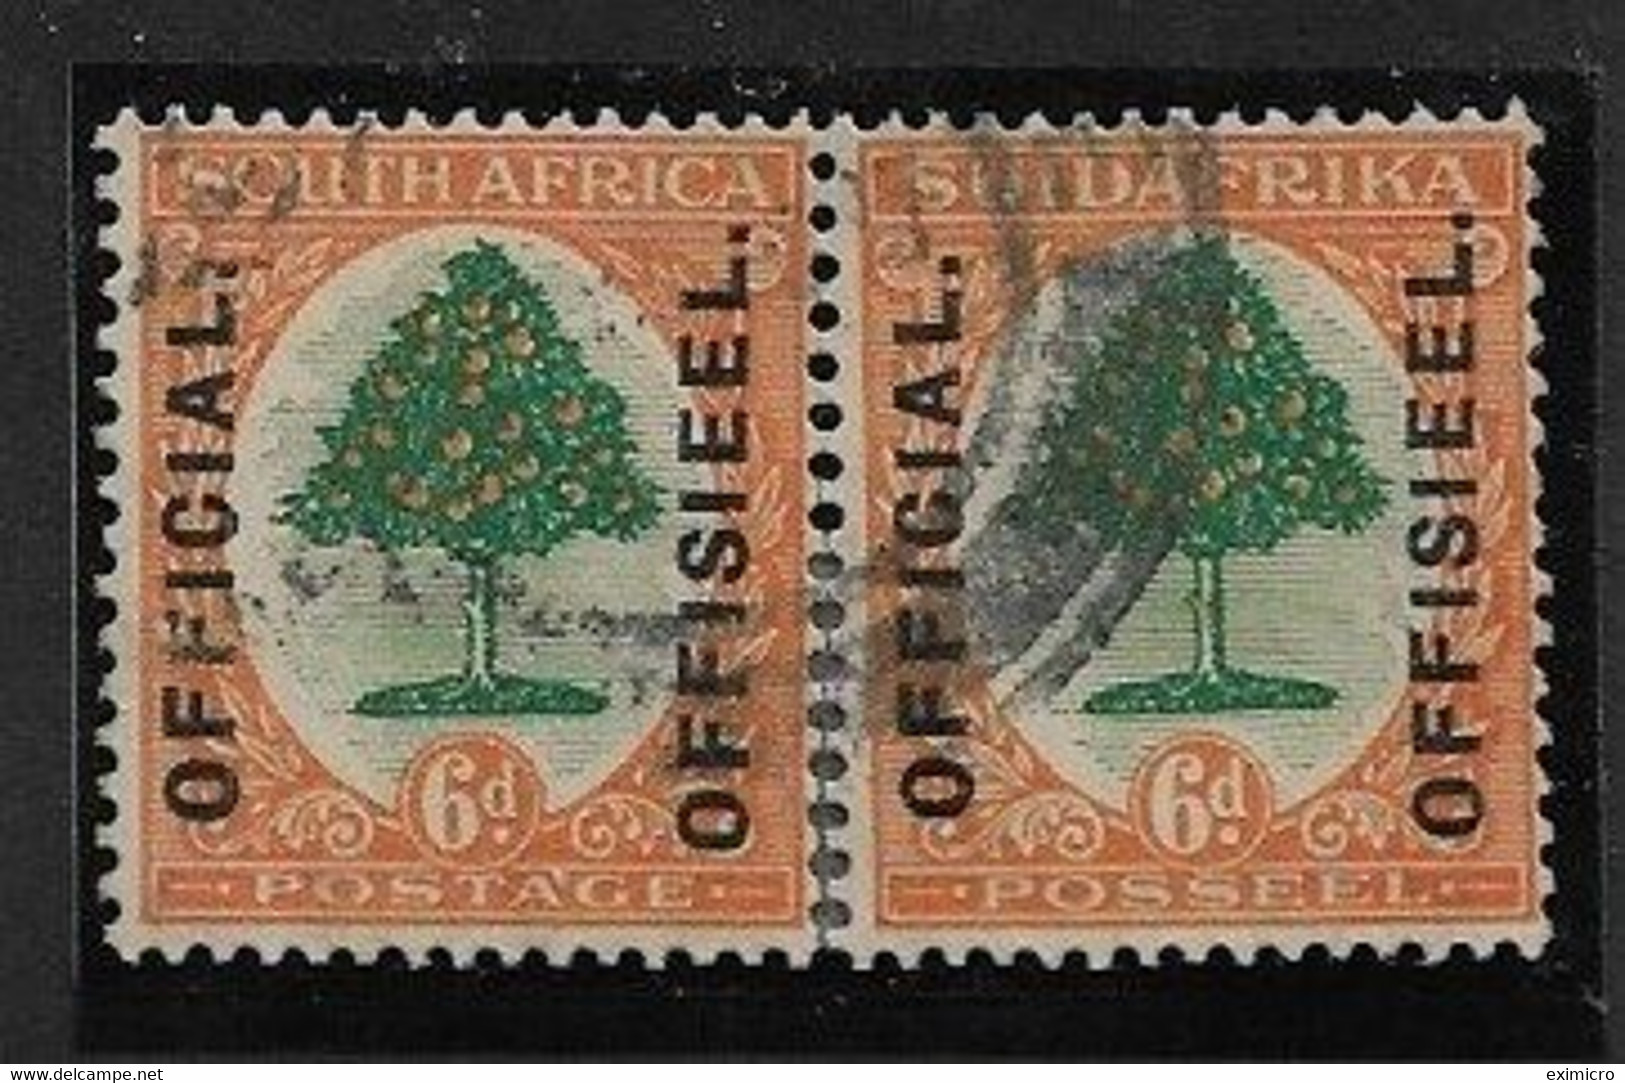 SOUTH AFRICA 1926 6d OFFICIAL BILINGUAL PAIR SG O4 FINE USED Cat £75 - Oficiales